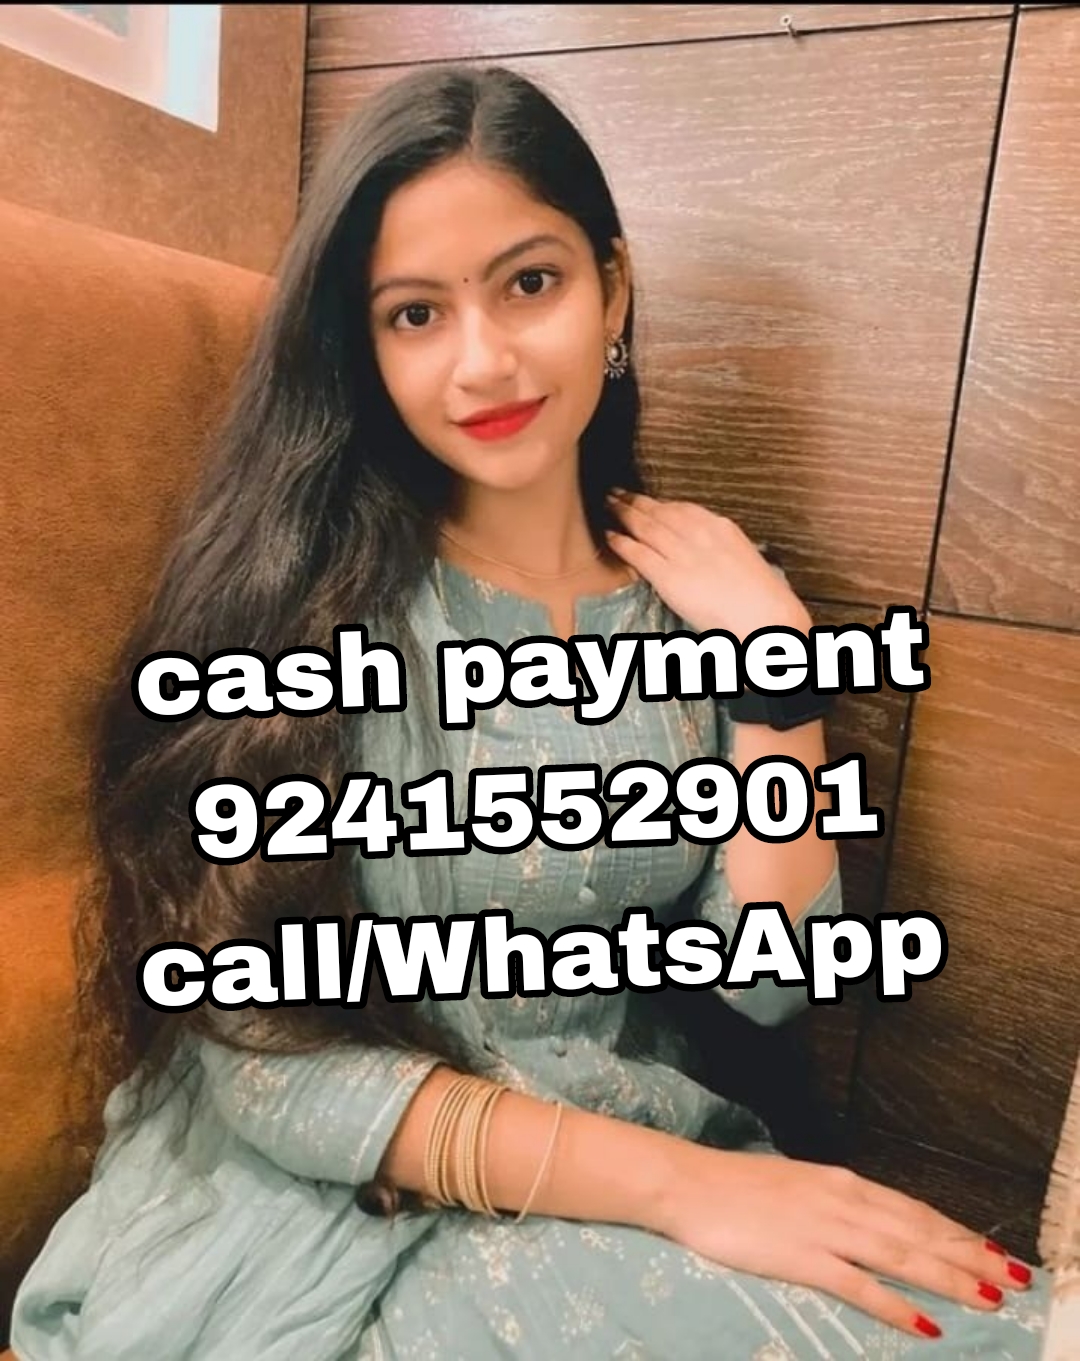 AURANGABAD IN BEST SERVICE AVAILABLE ANYTIME FULL SUCKING DOGGY STYLE 